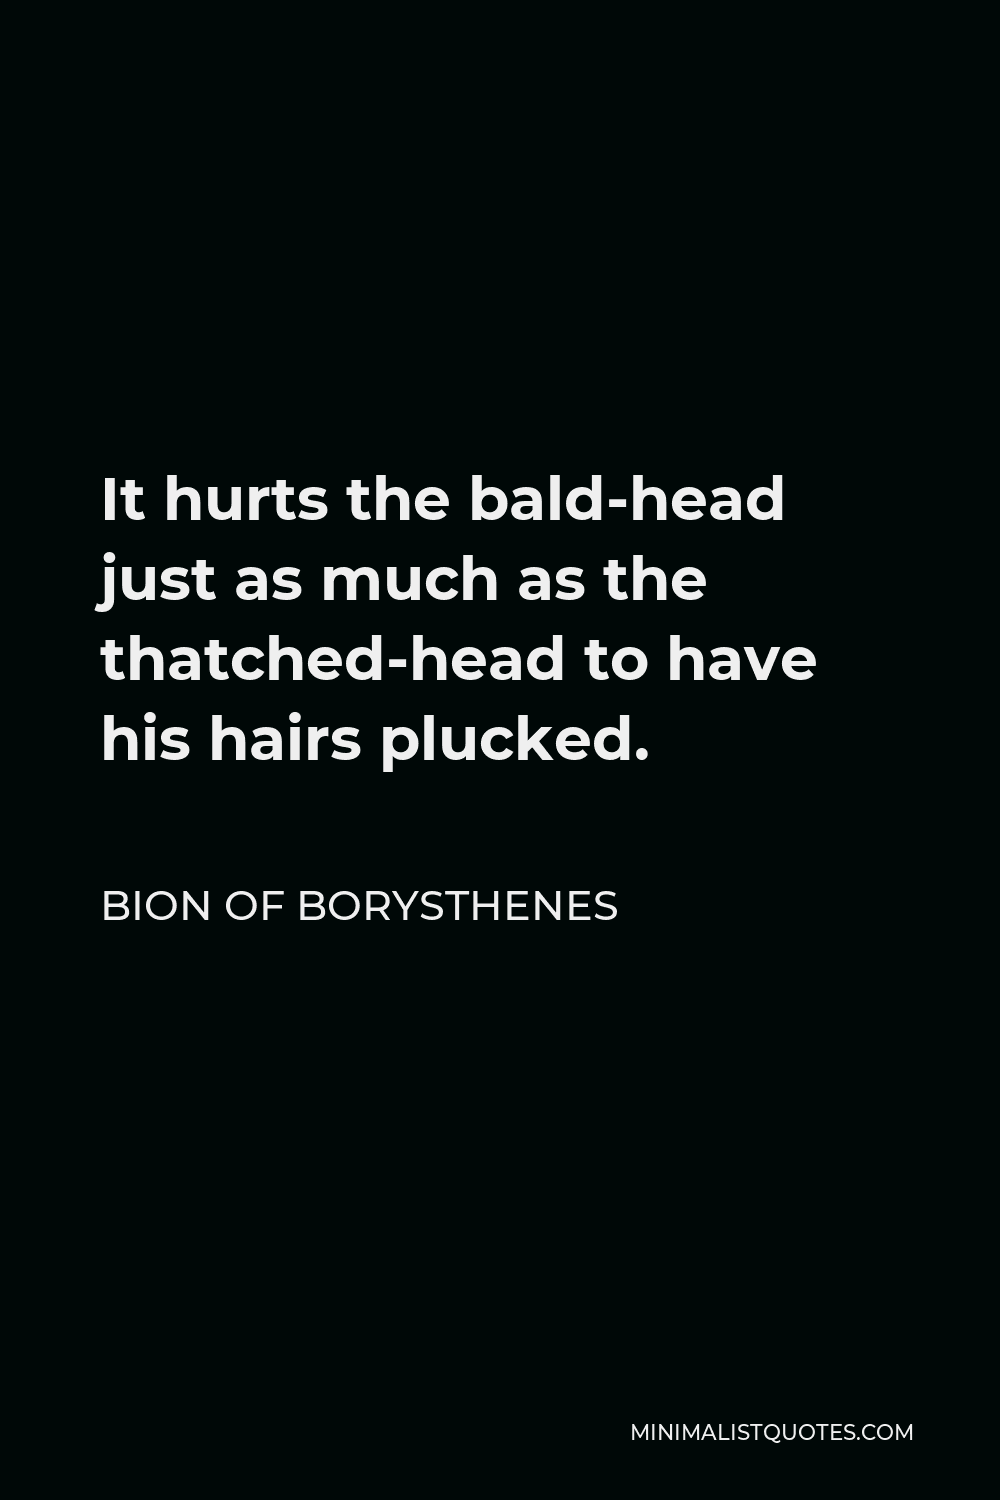 Bion of Borysthenes Quote - It hurts the bald-head just as much as the thatched-head to have his hairs plucked.